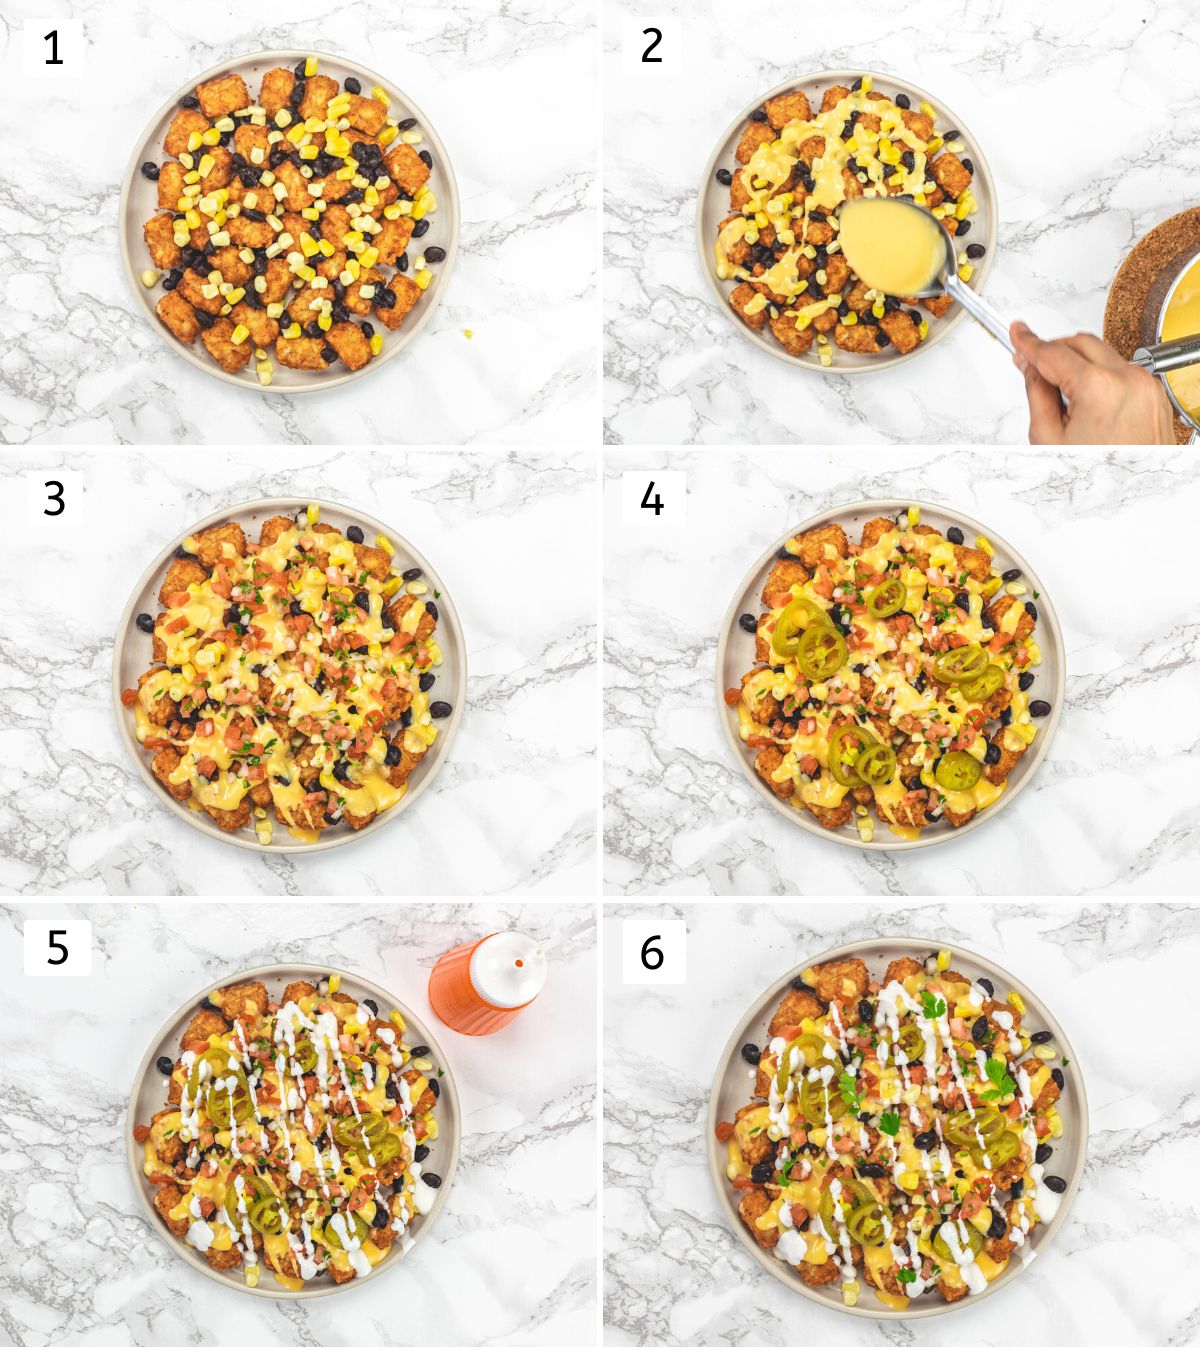 Collage of 6 images showing assembling totchos in a plate with tater tots and toppings.